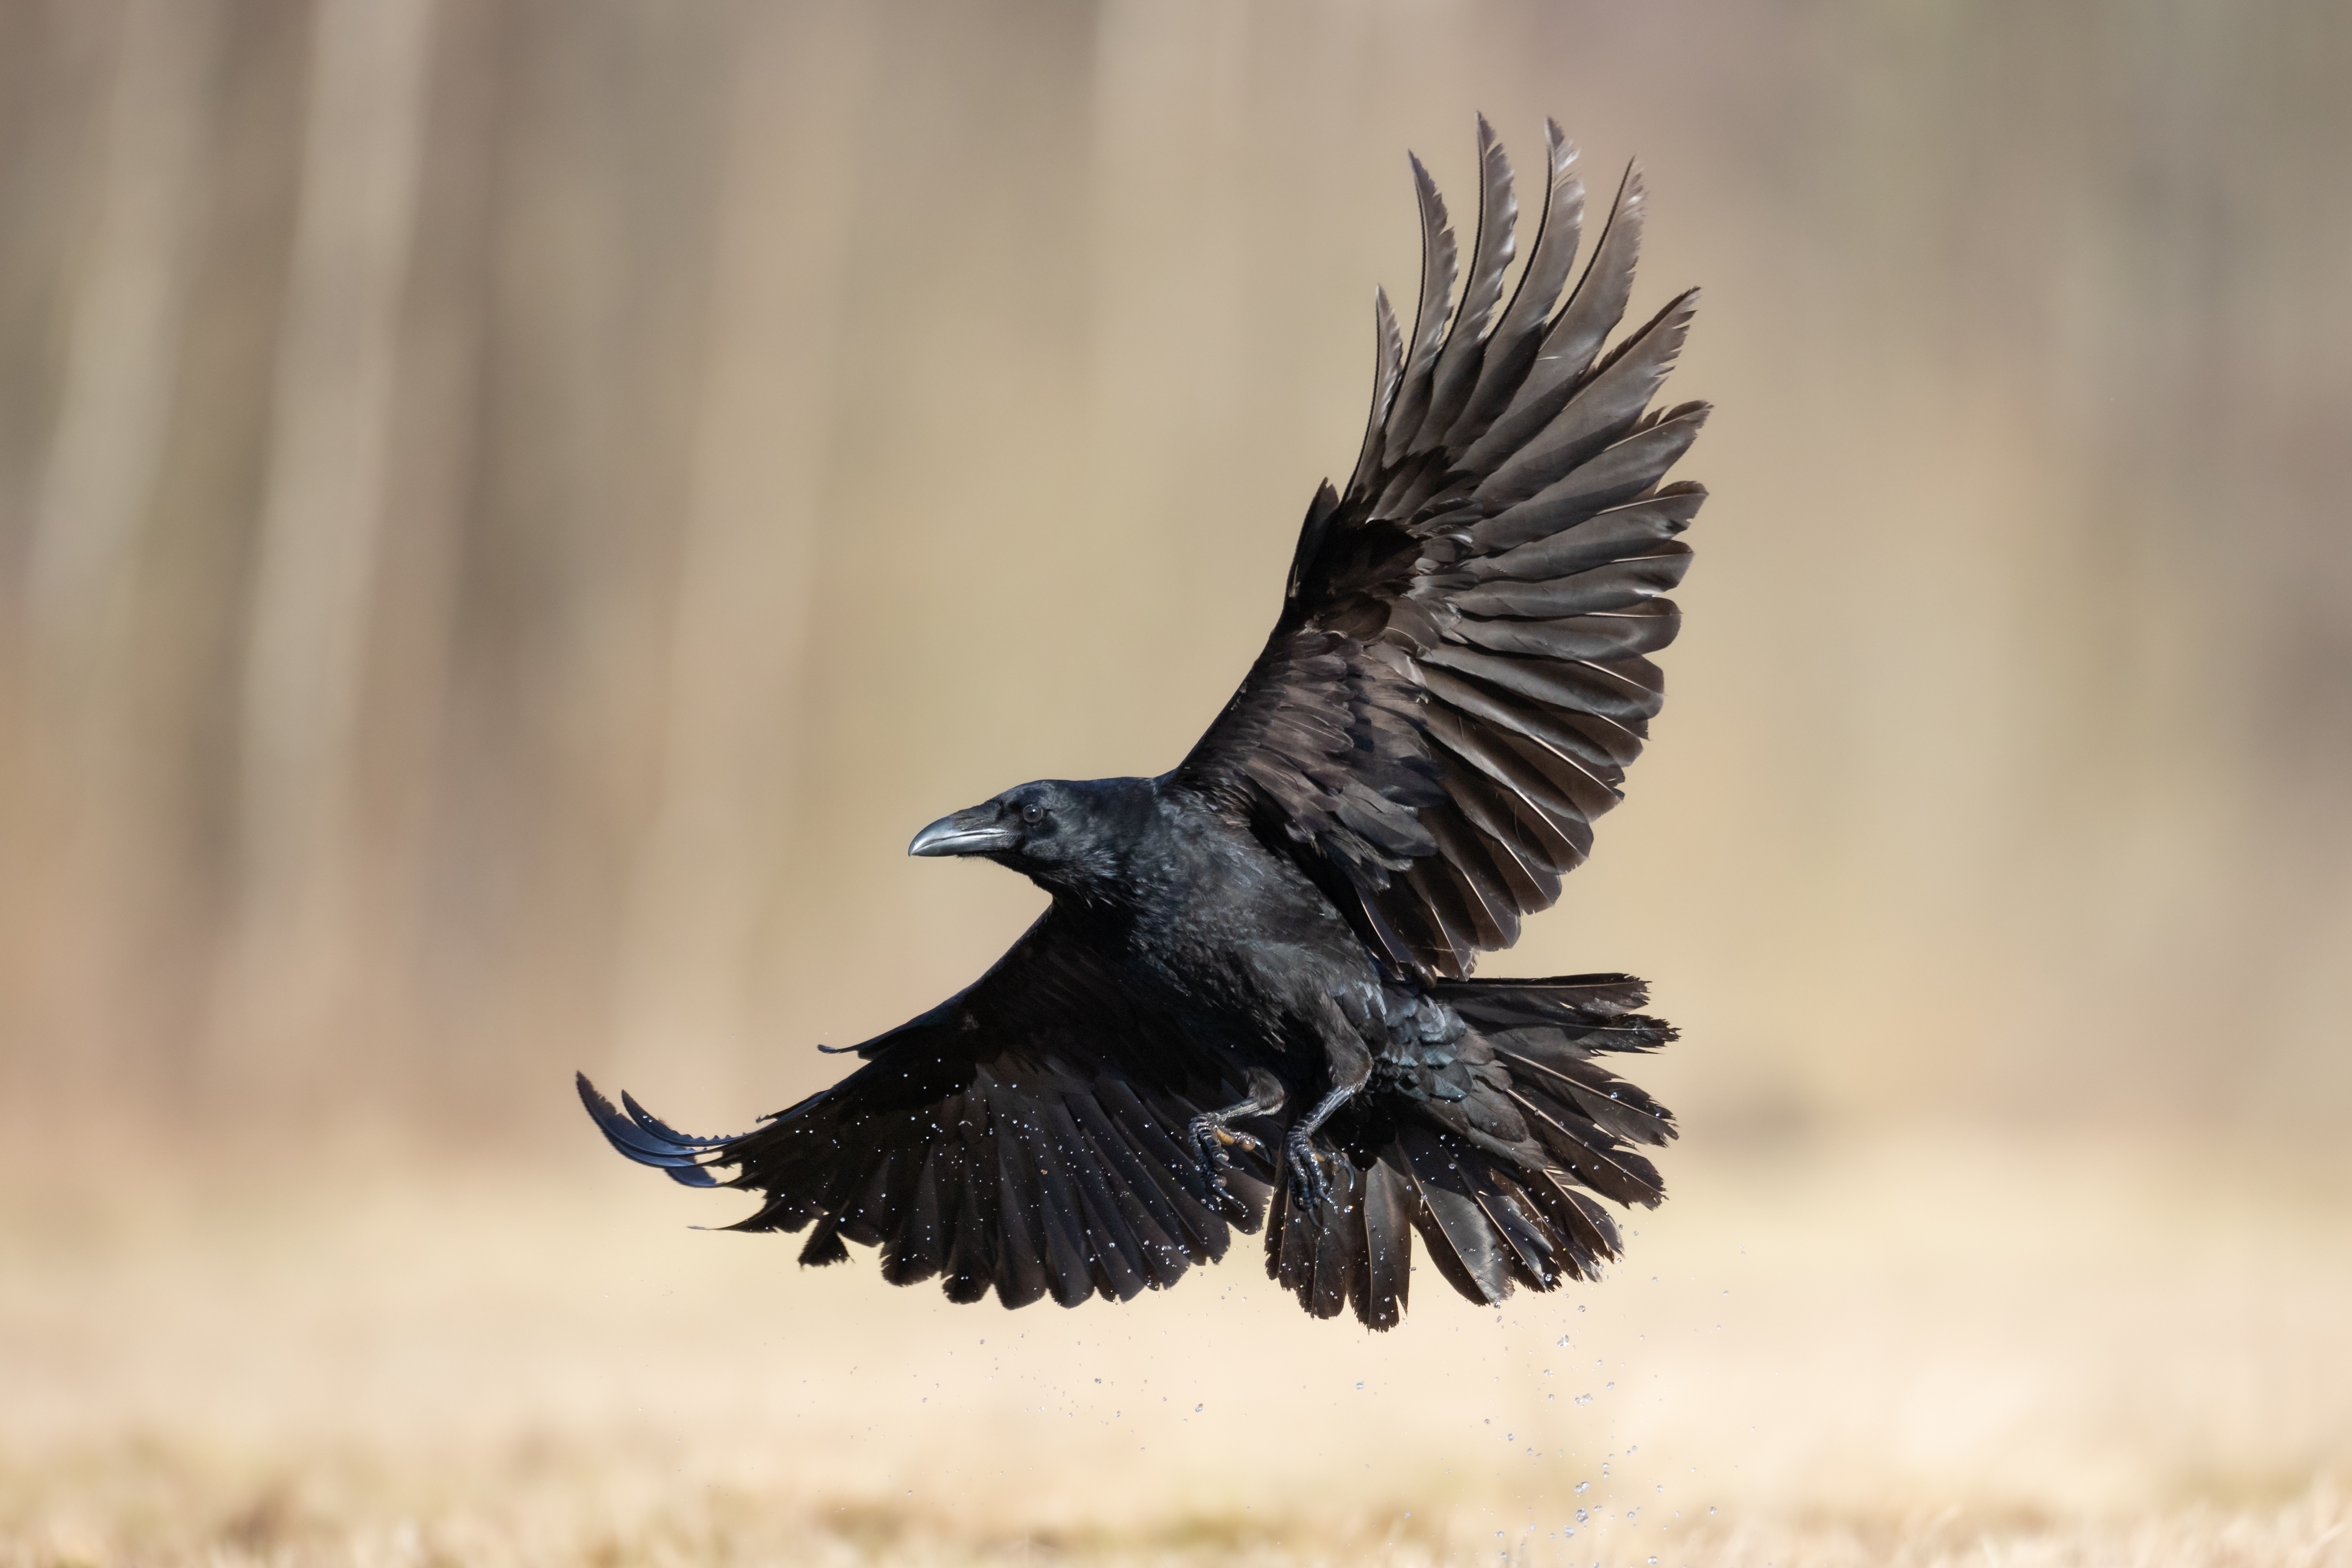 A large raven with wings outspread on a pale blurry background.